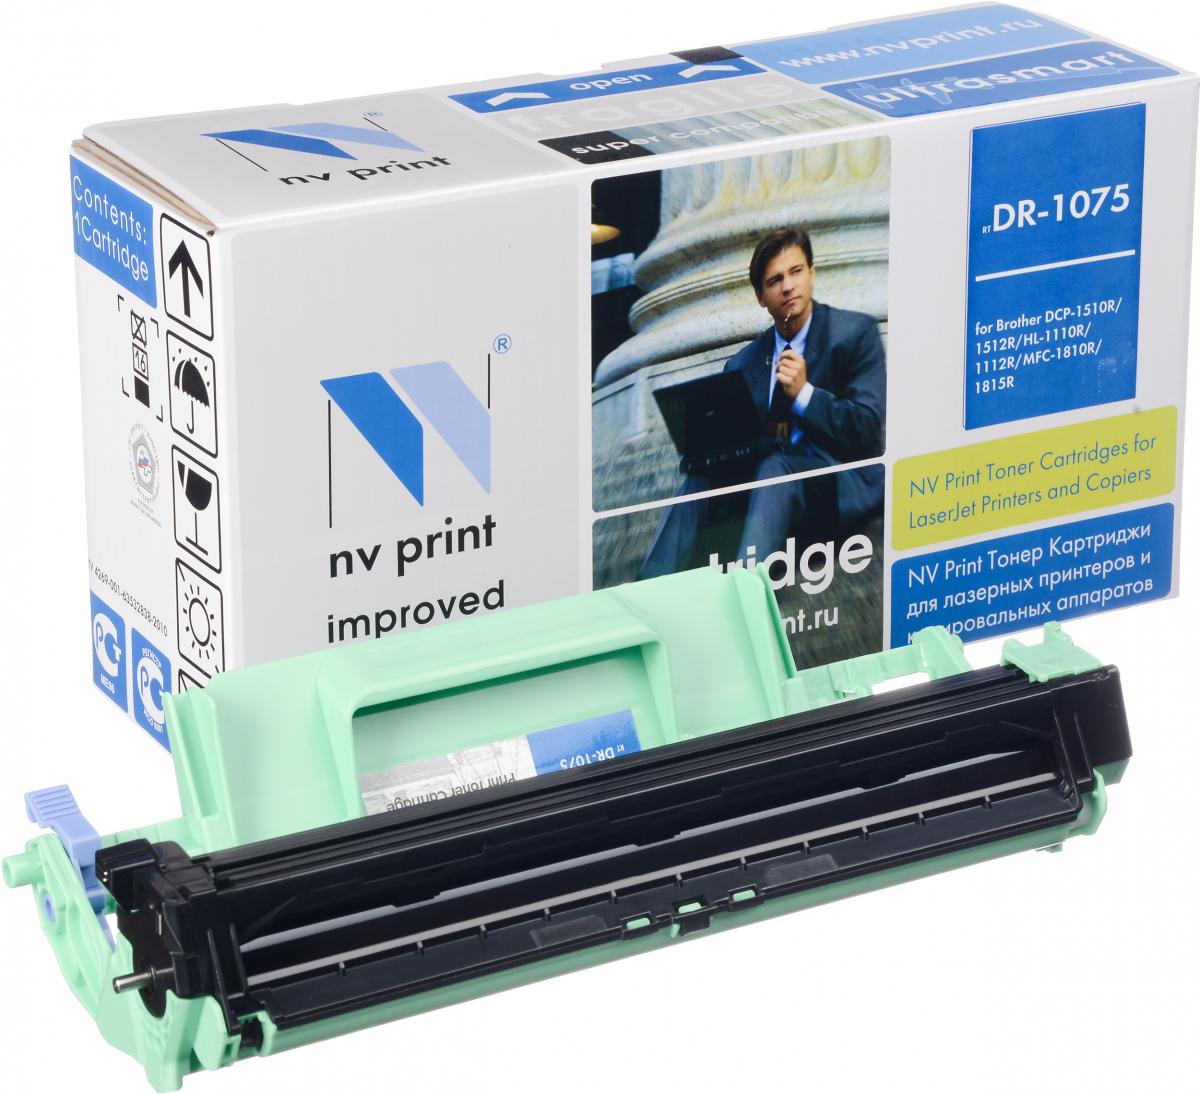   NV-Print  Brother DR-1075, DCP-1510R/DCP-1512R/HL-1110R